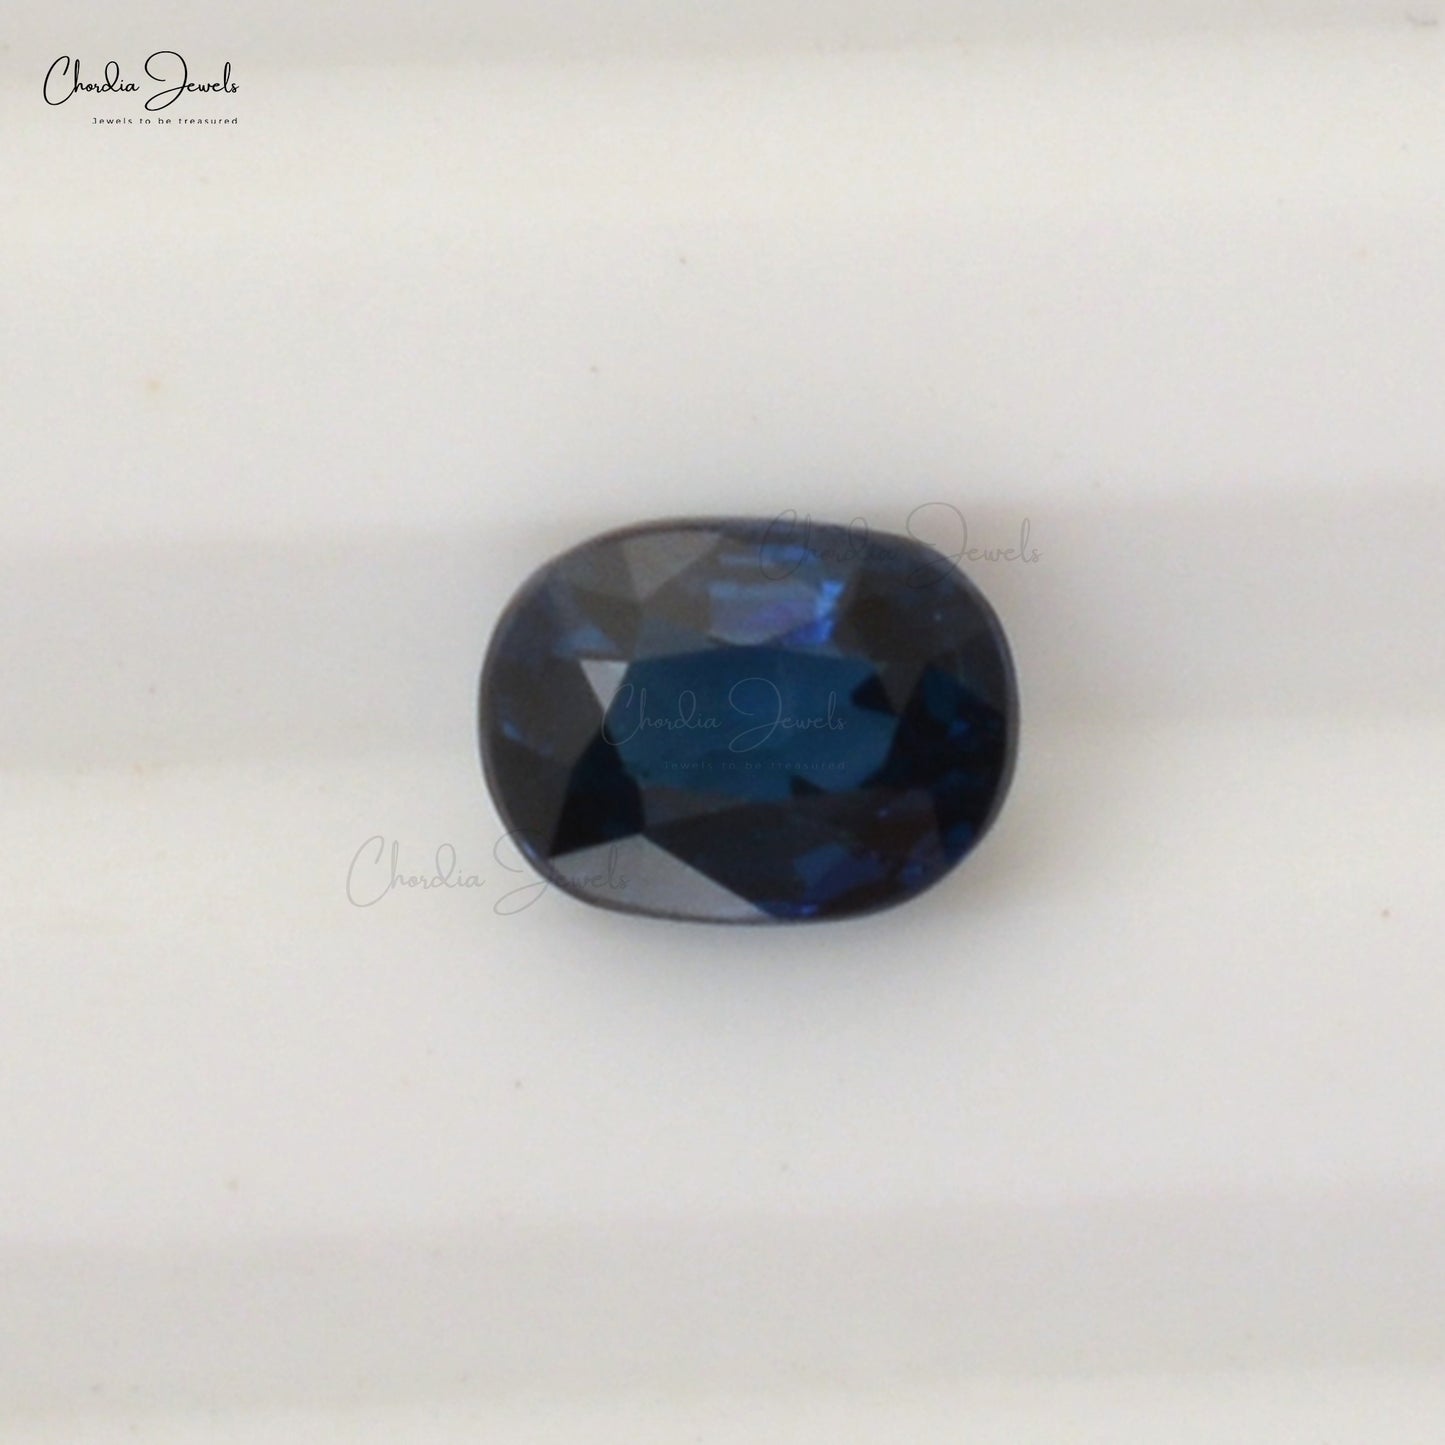 Load image into Gallery viewer, 1.1 carat Super Fine Quality Blue Sapphire Oval Cut Gemstone for Making Necklaces, 1 Piece
